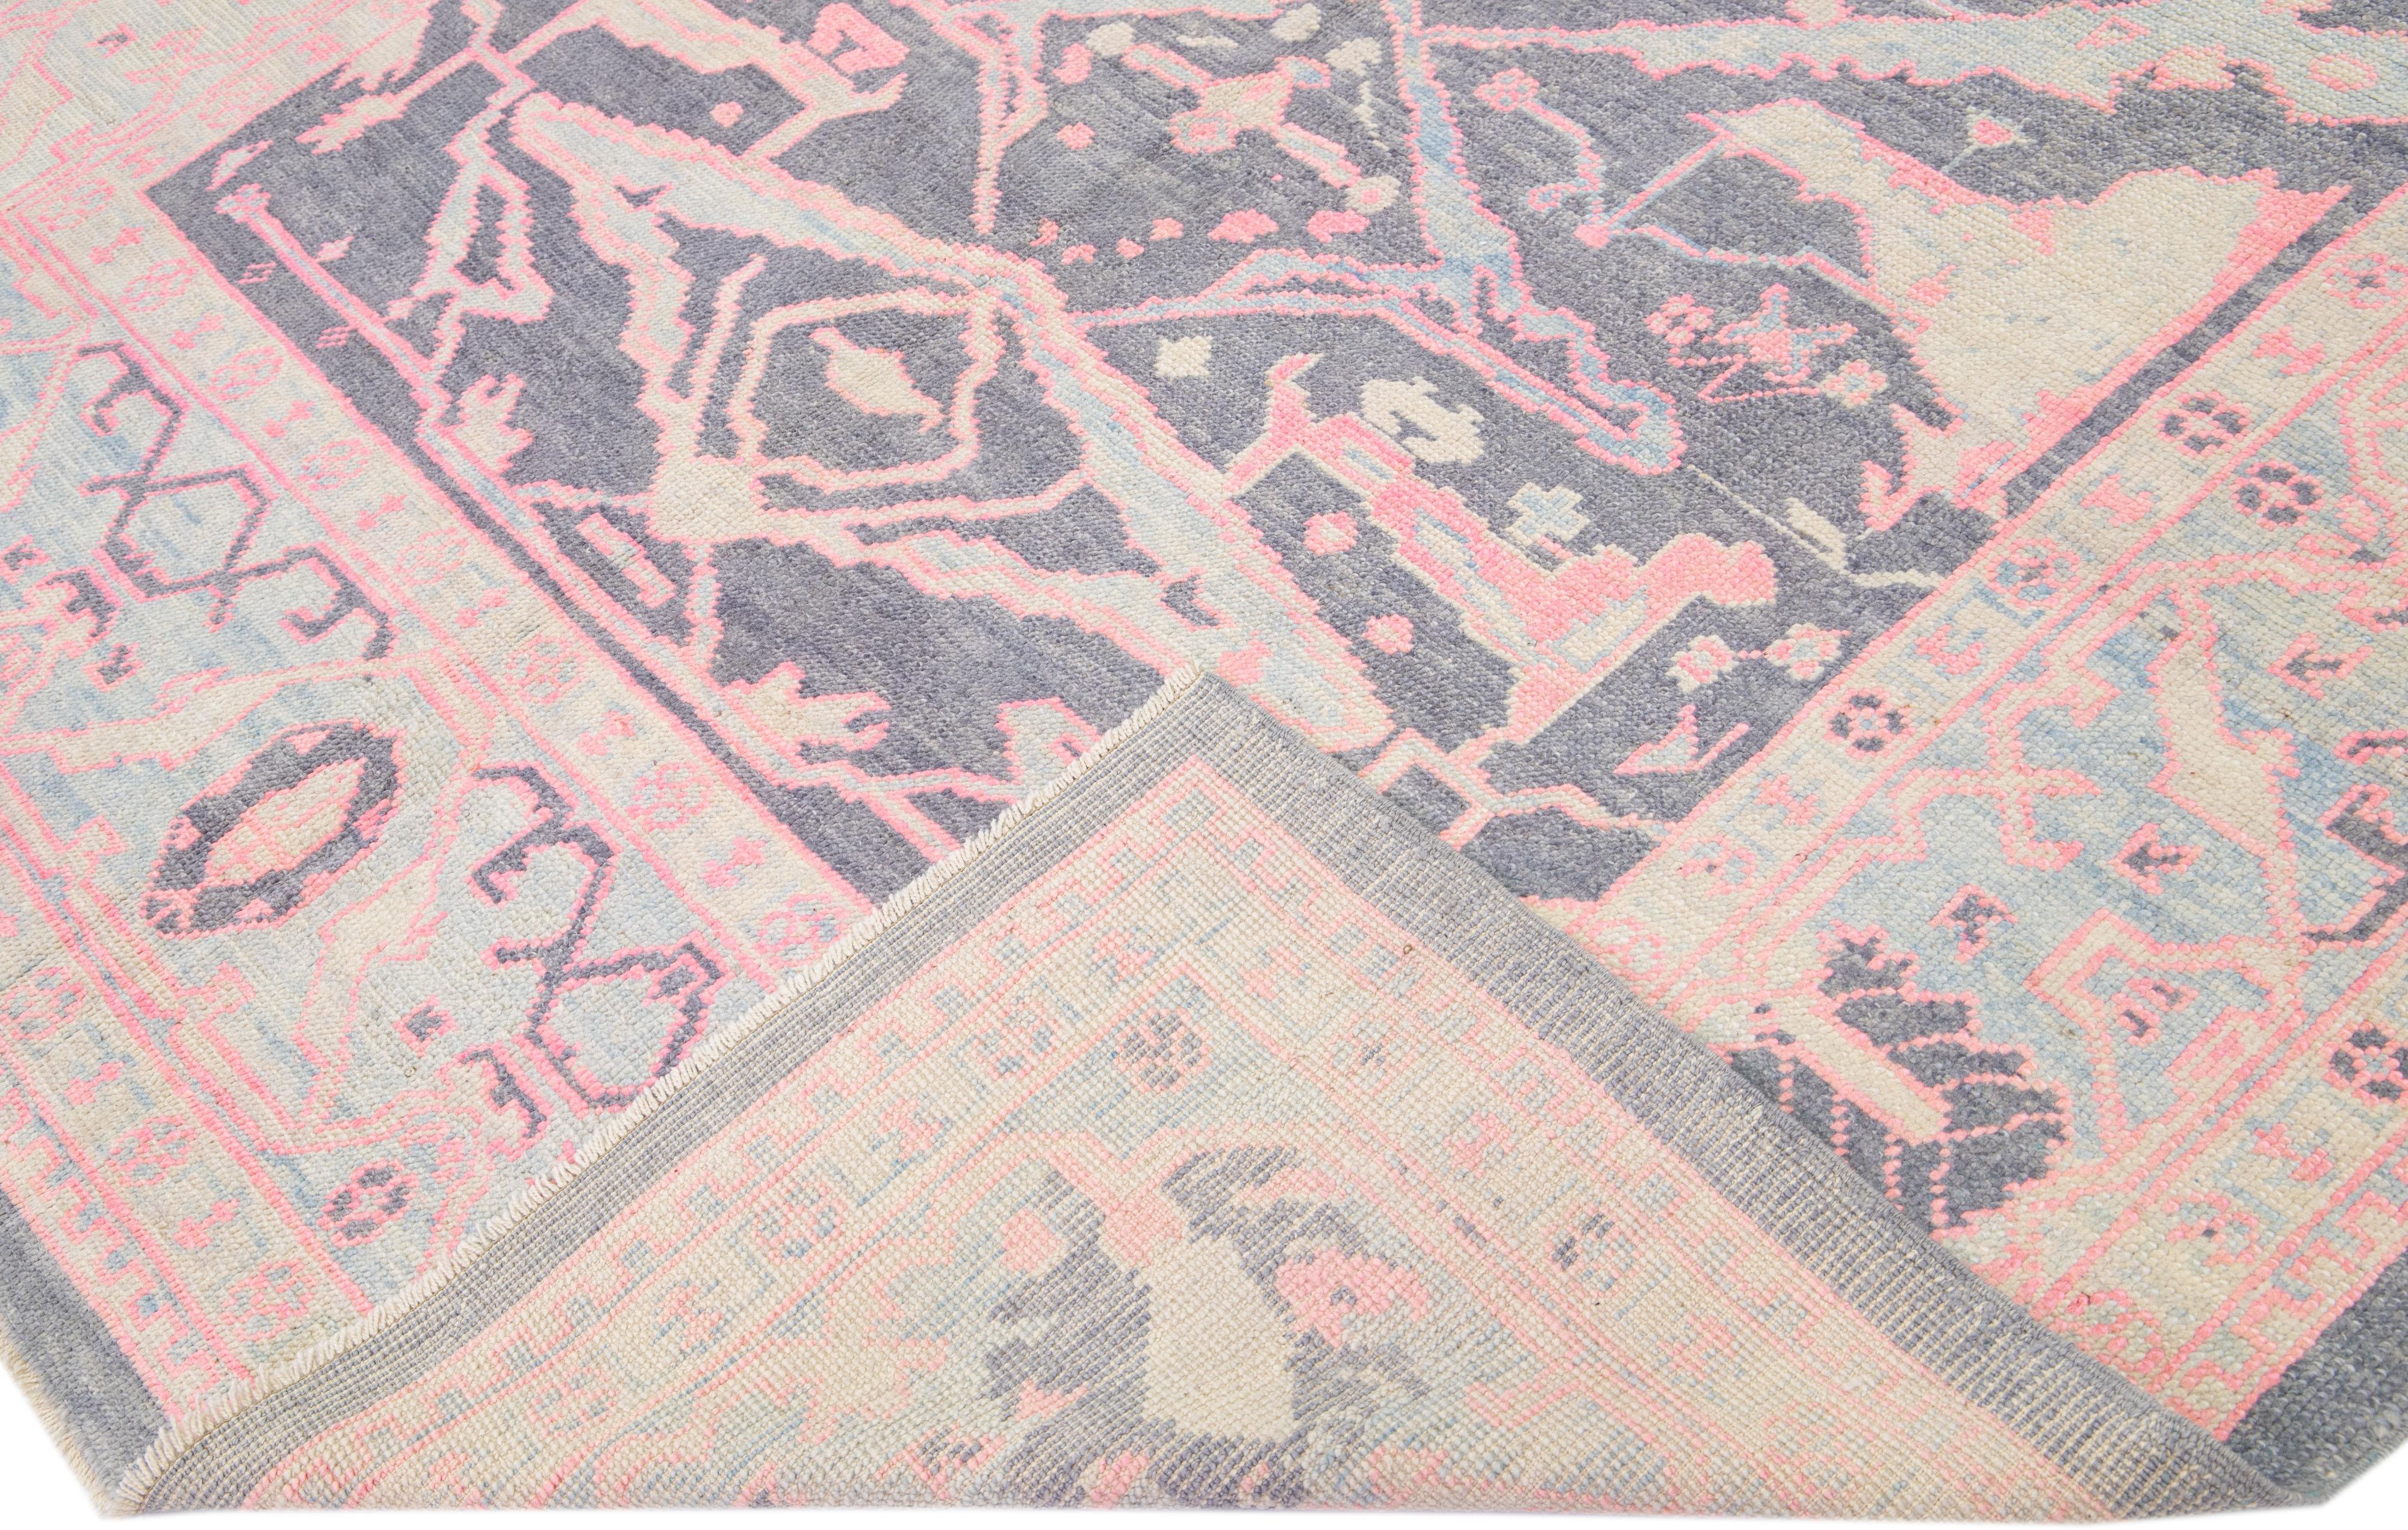 Beautiful modern Turkish Oushak hand-knotted wool rug with a gray and pink color field in a gorgeous all-over floral design.

This rug measures: 7'10